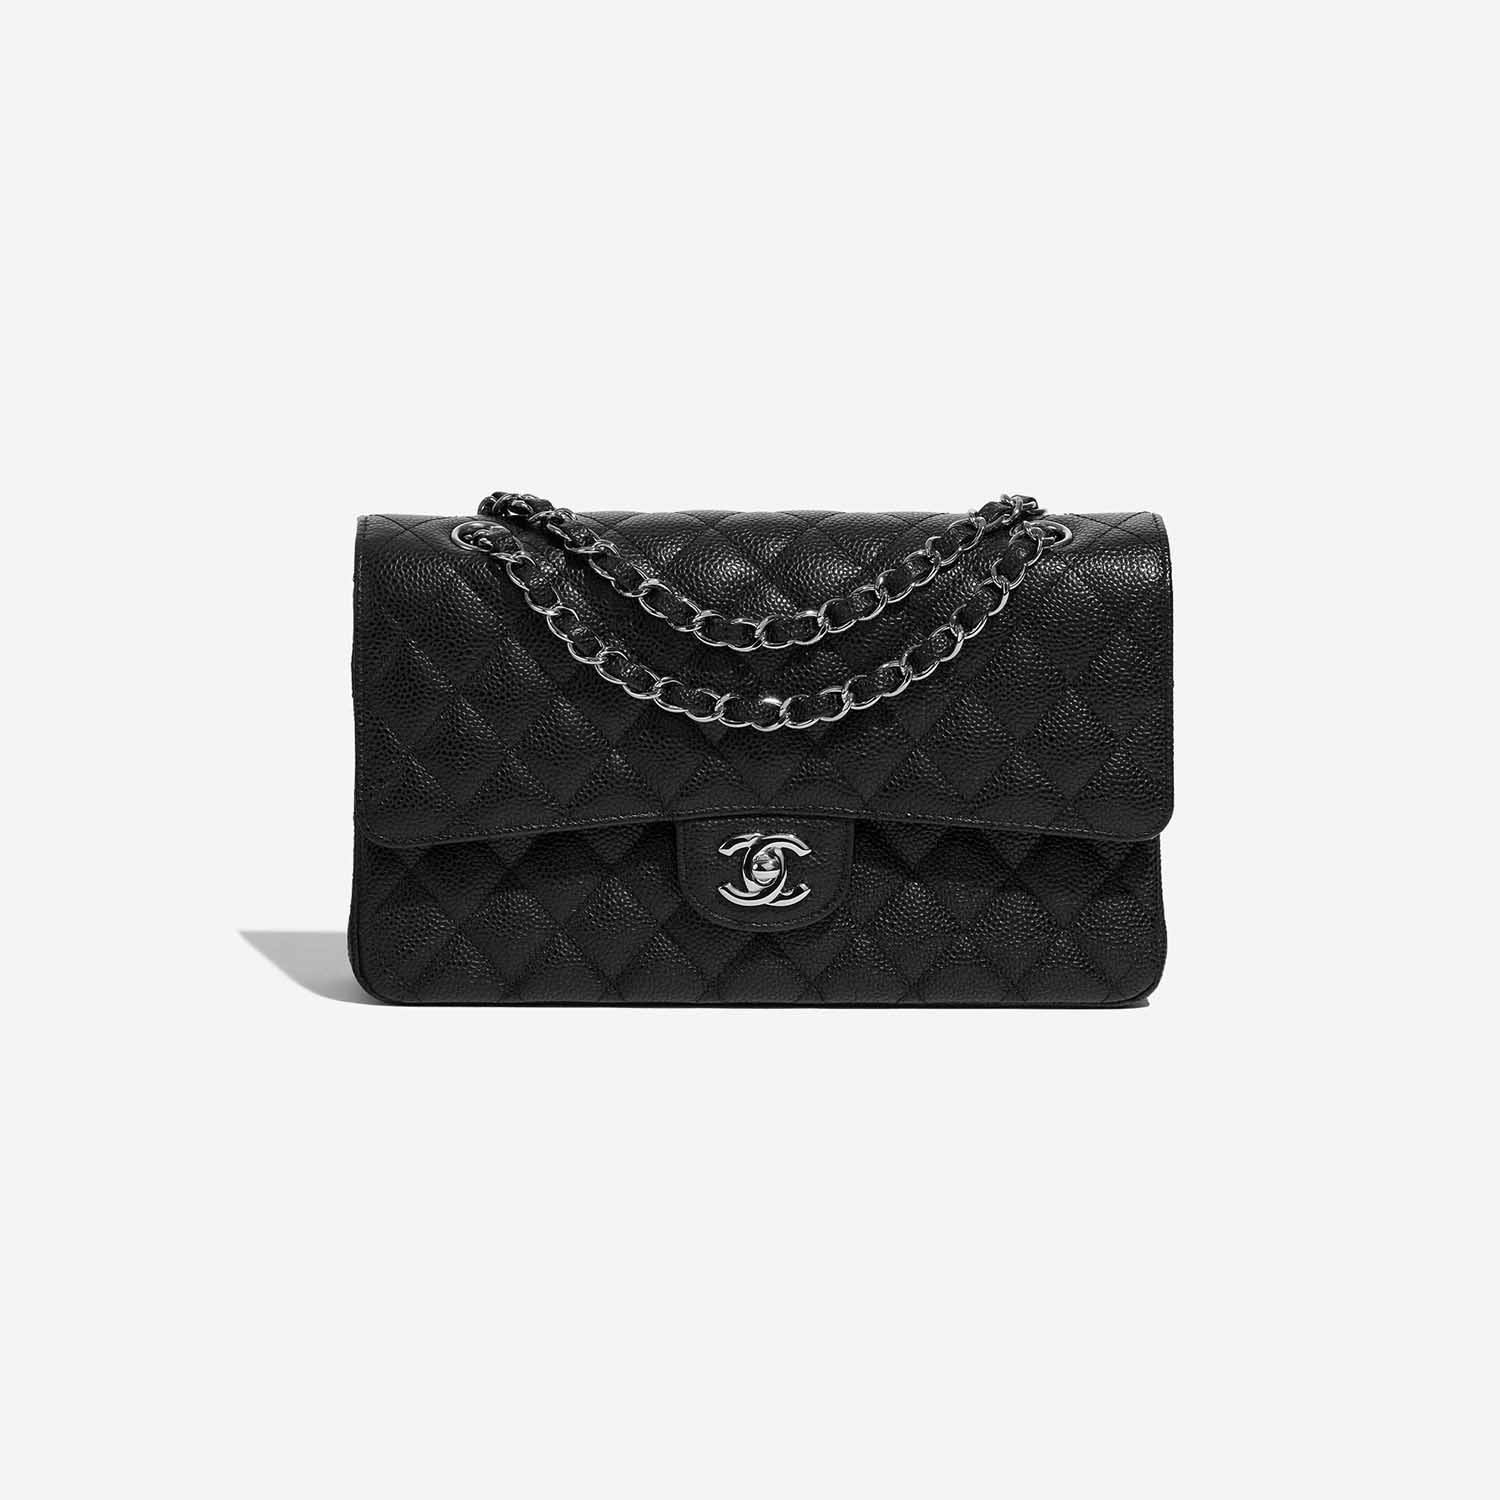 CHANEL, Bags, Sold Chanel Classic Flap Medium Black Caviar With Gold  Hardware